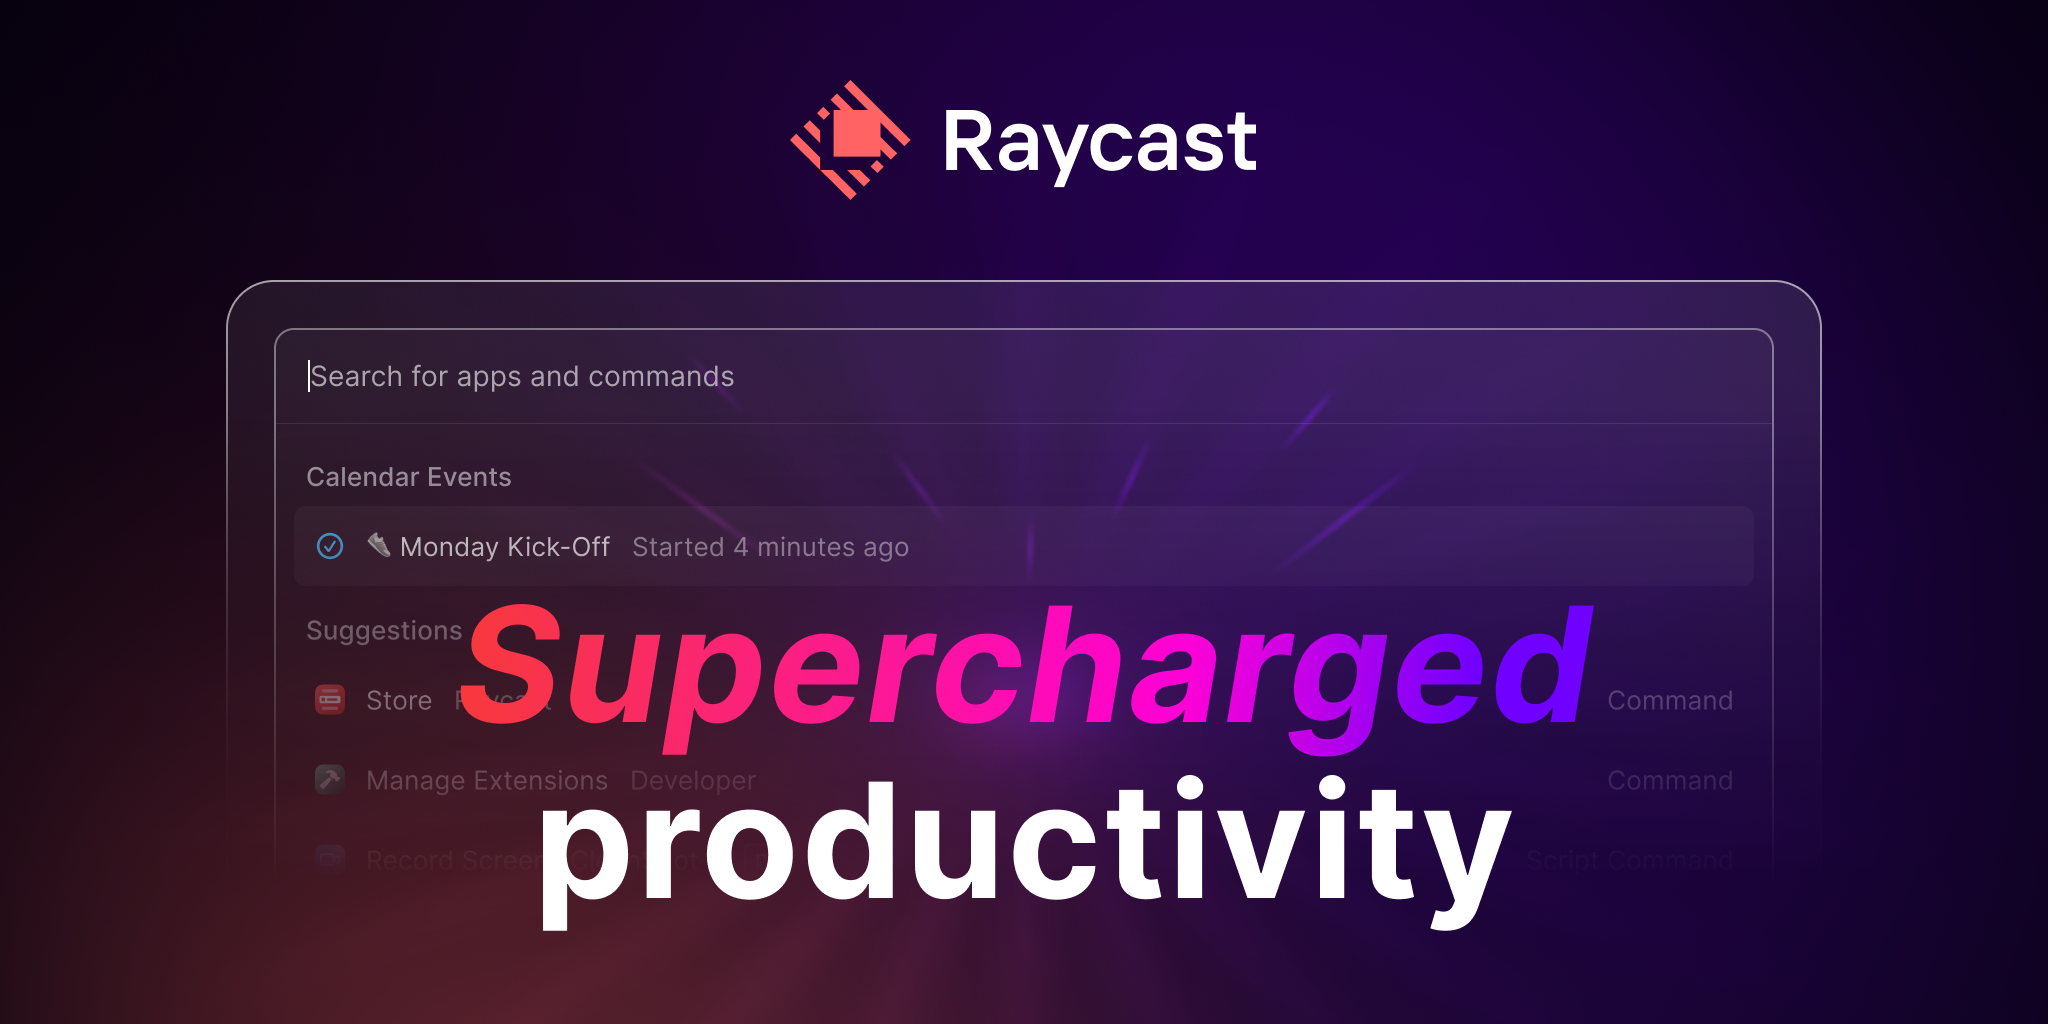 Thumbnail of Raycast - Supercharged productivity